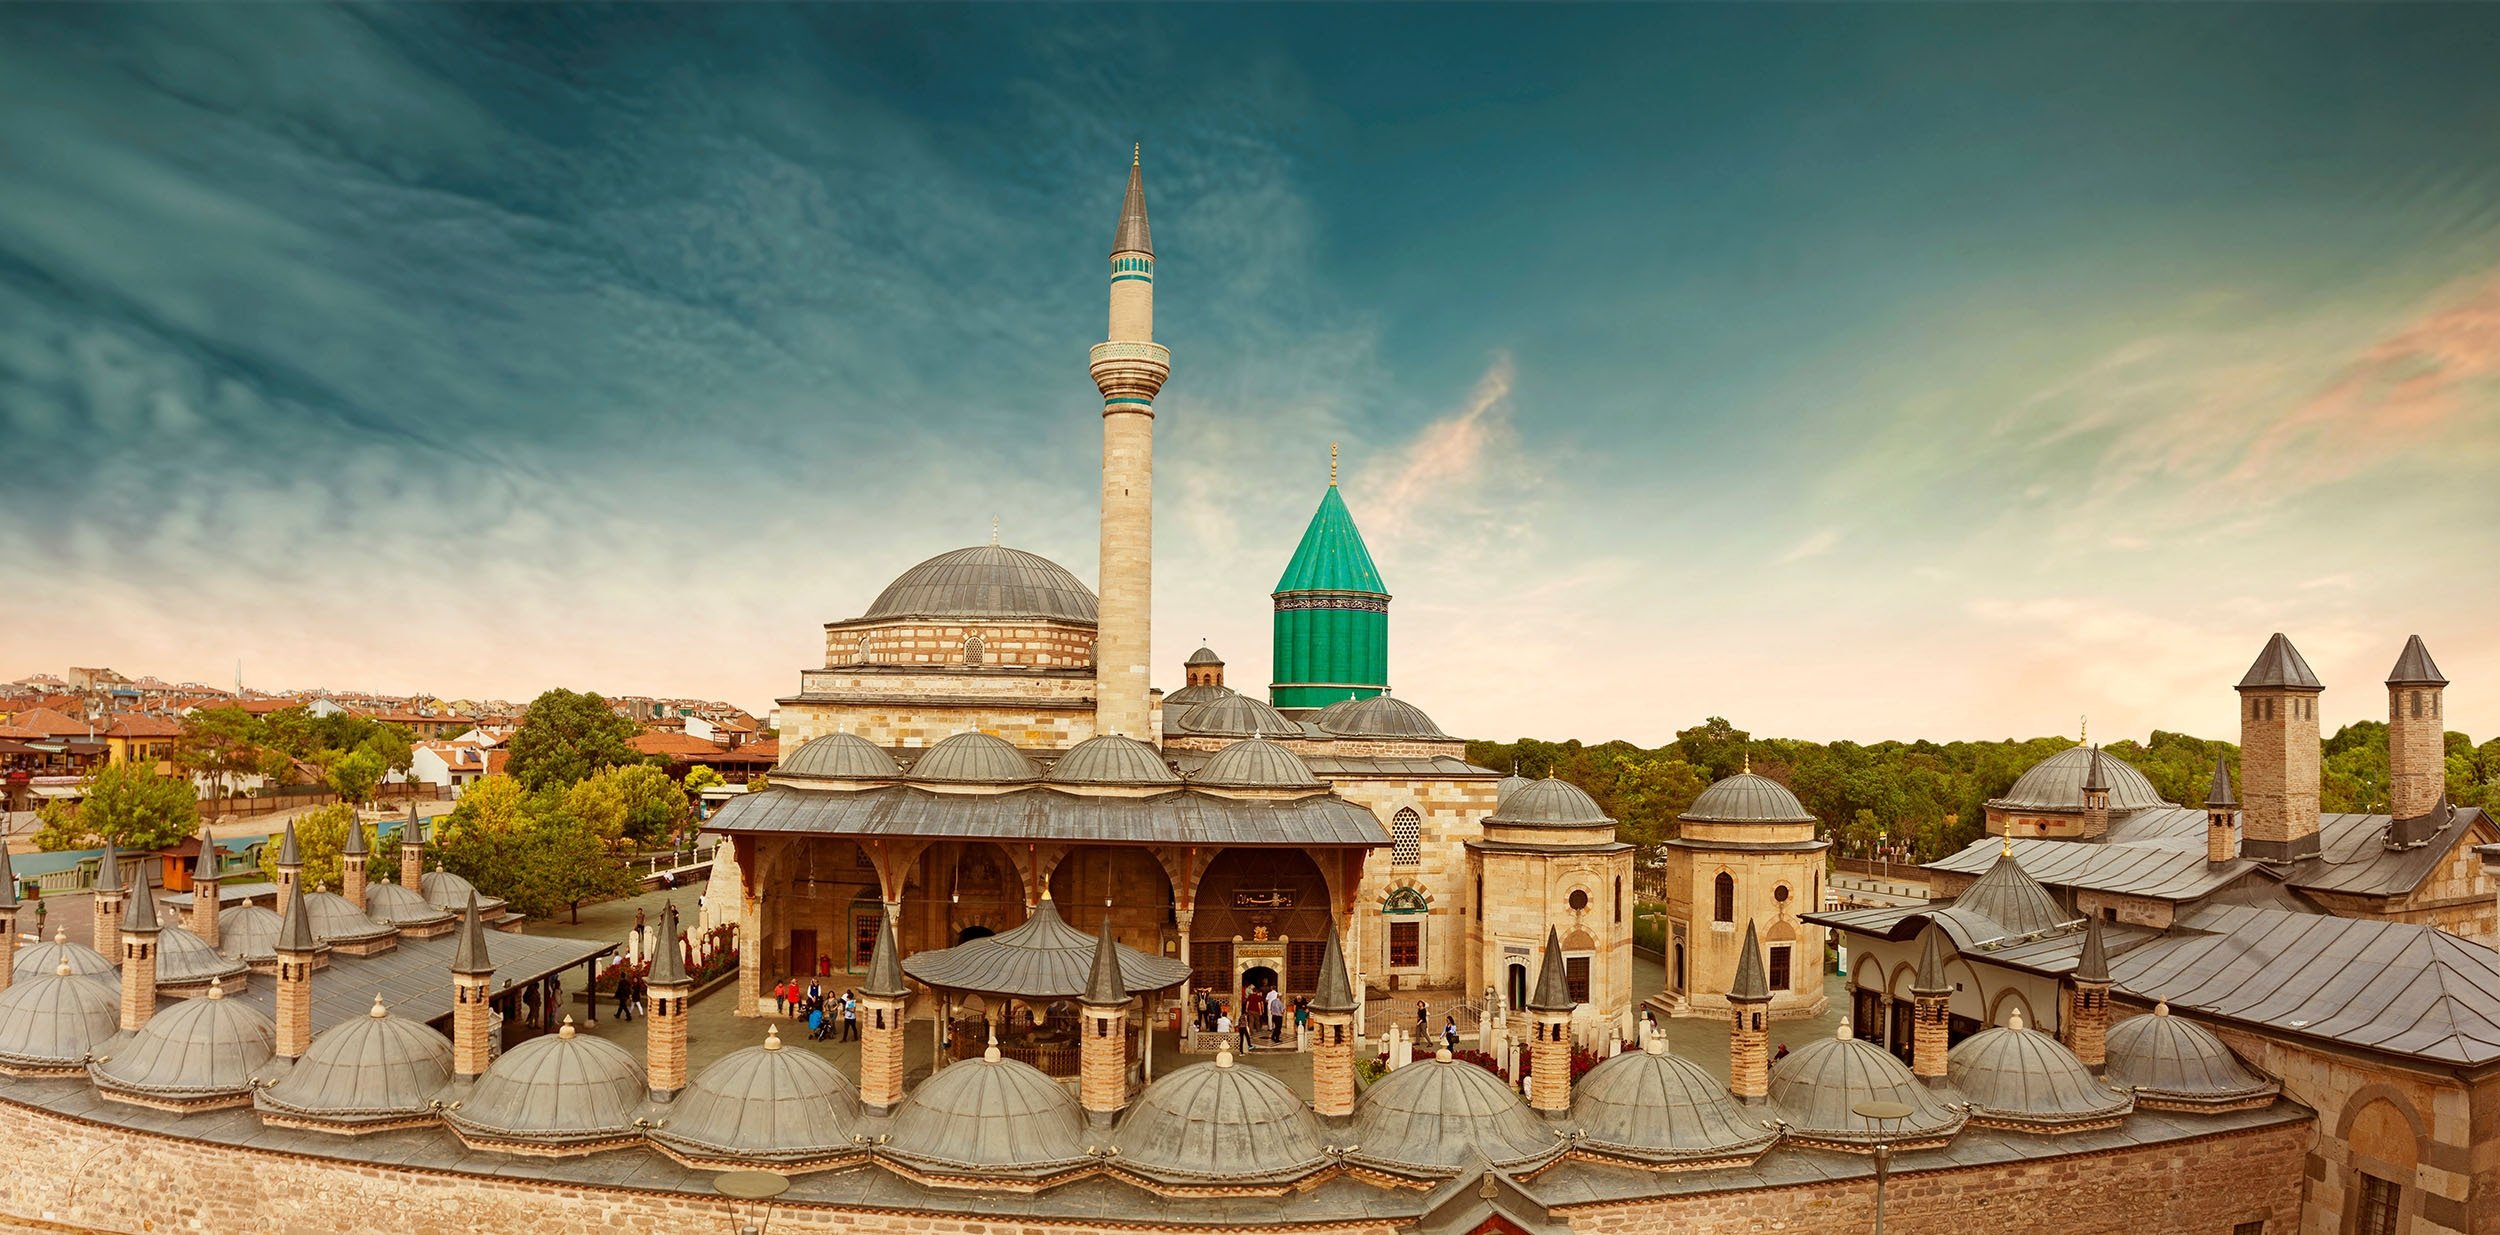 A view from the Tomb of Mevlana Jalaladdin Rumi in Konya, central Turkey. (Shutterstock Photo) 